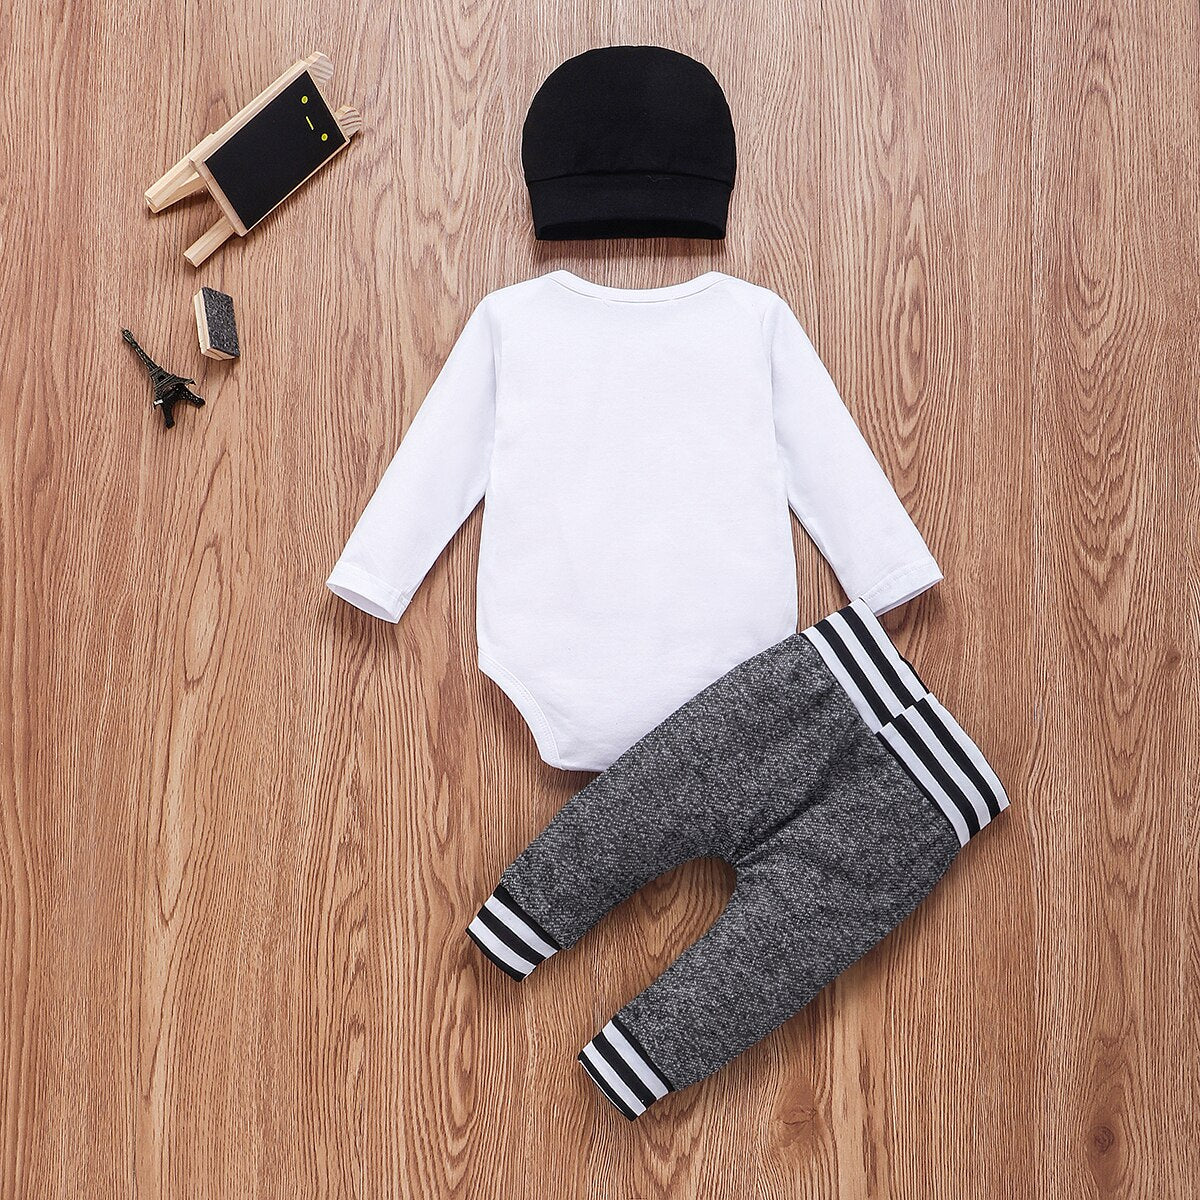 0-18Months Newborn Infant Baby Boy Clothes Cotton Sets Long Sleeve Romper Pant Hats Outfit 3Pcs Baby Warm Clothing